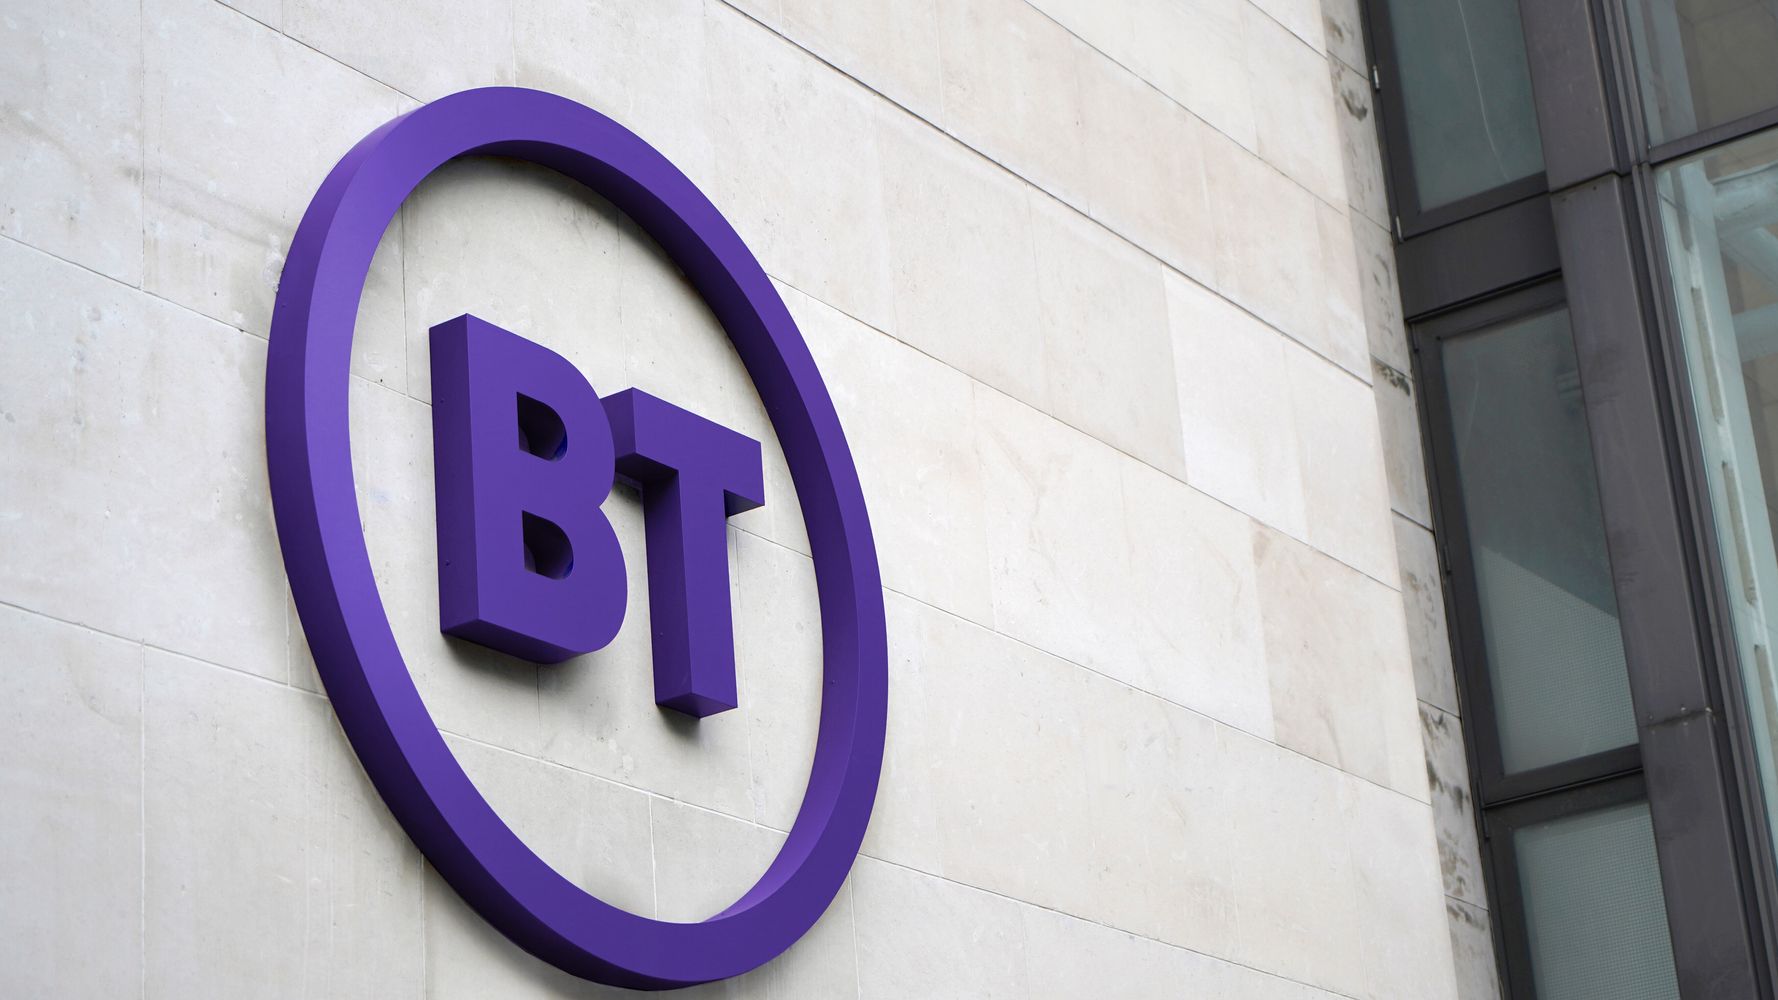 BT Workers Vote For Strike Action, Joining 'Summer Of Discontent'